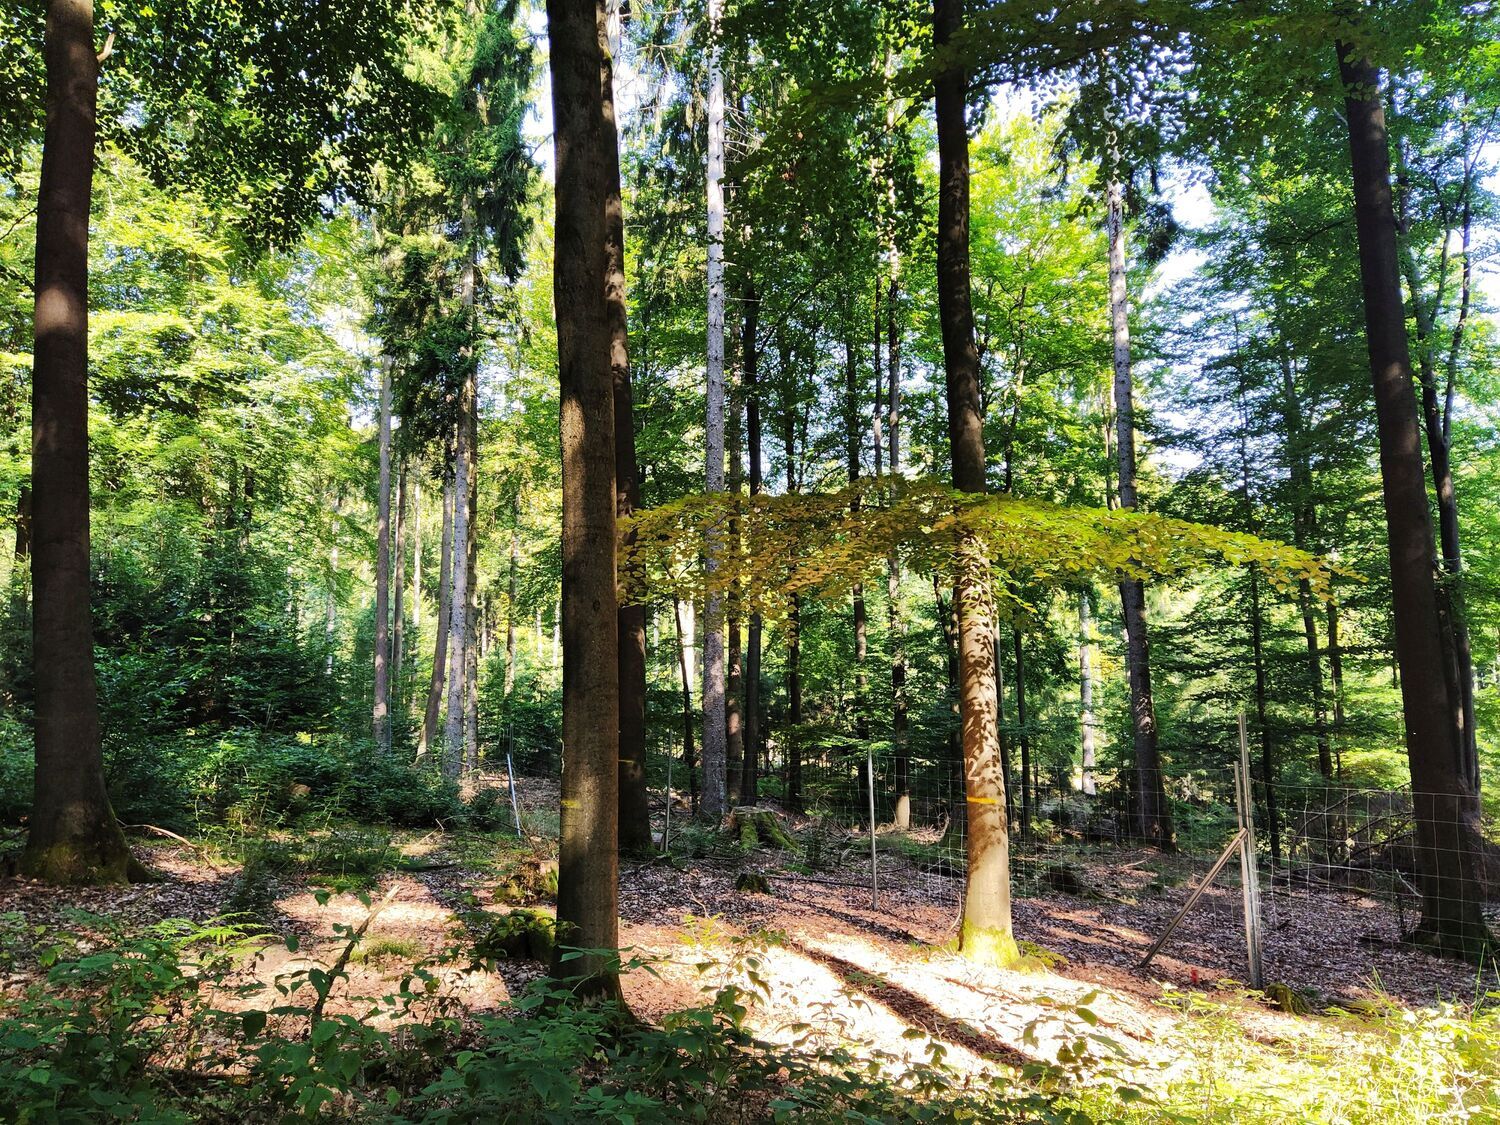 The German Research Foundation (DFG) has extended funding for the Research Training Group “Enrichment of European beech forests with conifers: impacts of functional traits on ecosystem functioning”